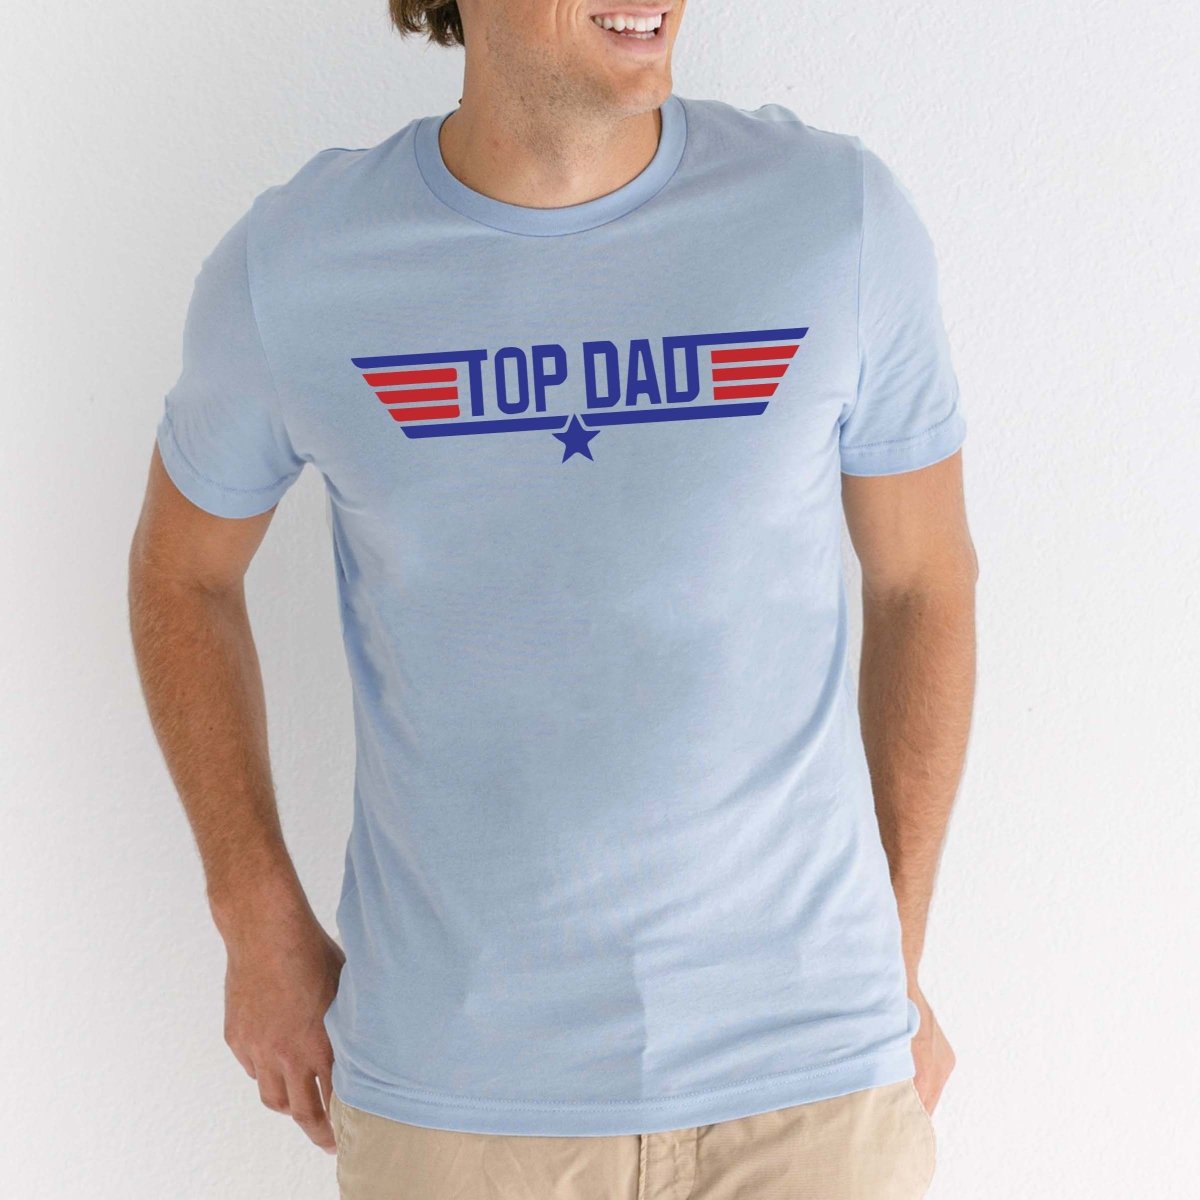 Top Dad Tee - Limeberry Designs